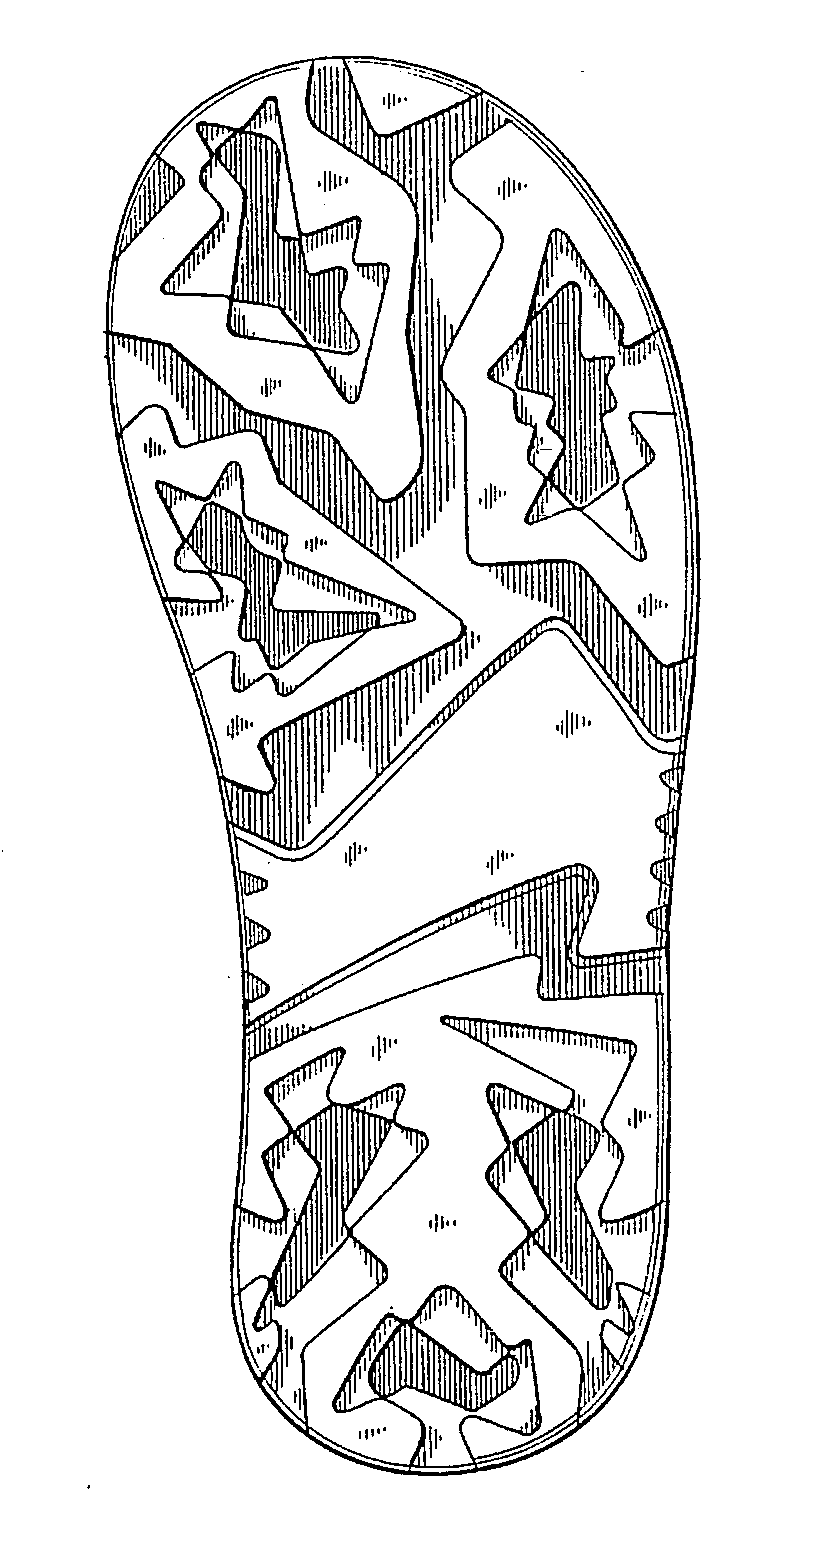 A typical example of a sole with a pattern or texture on thebottom.
